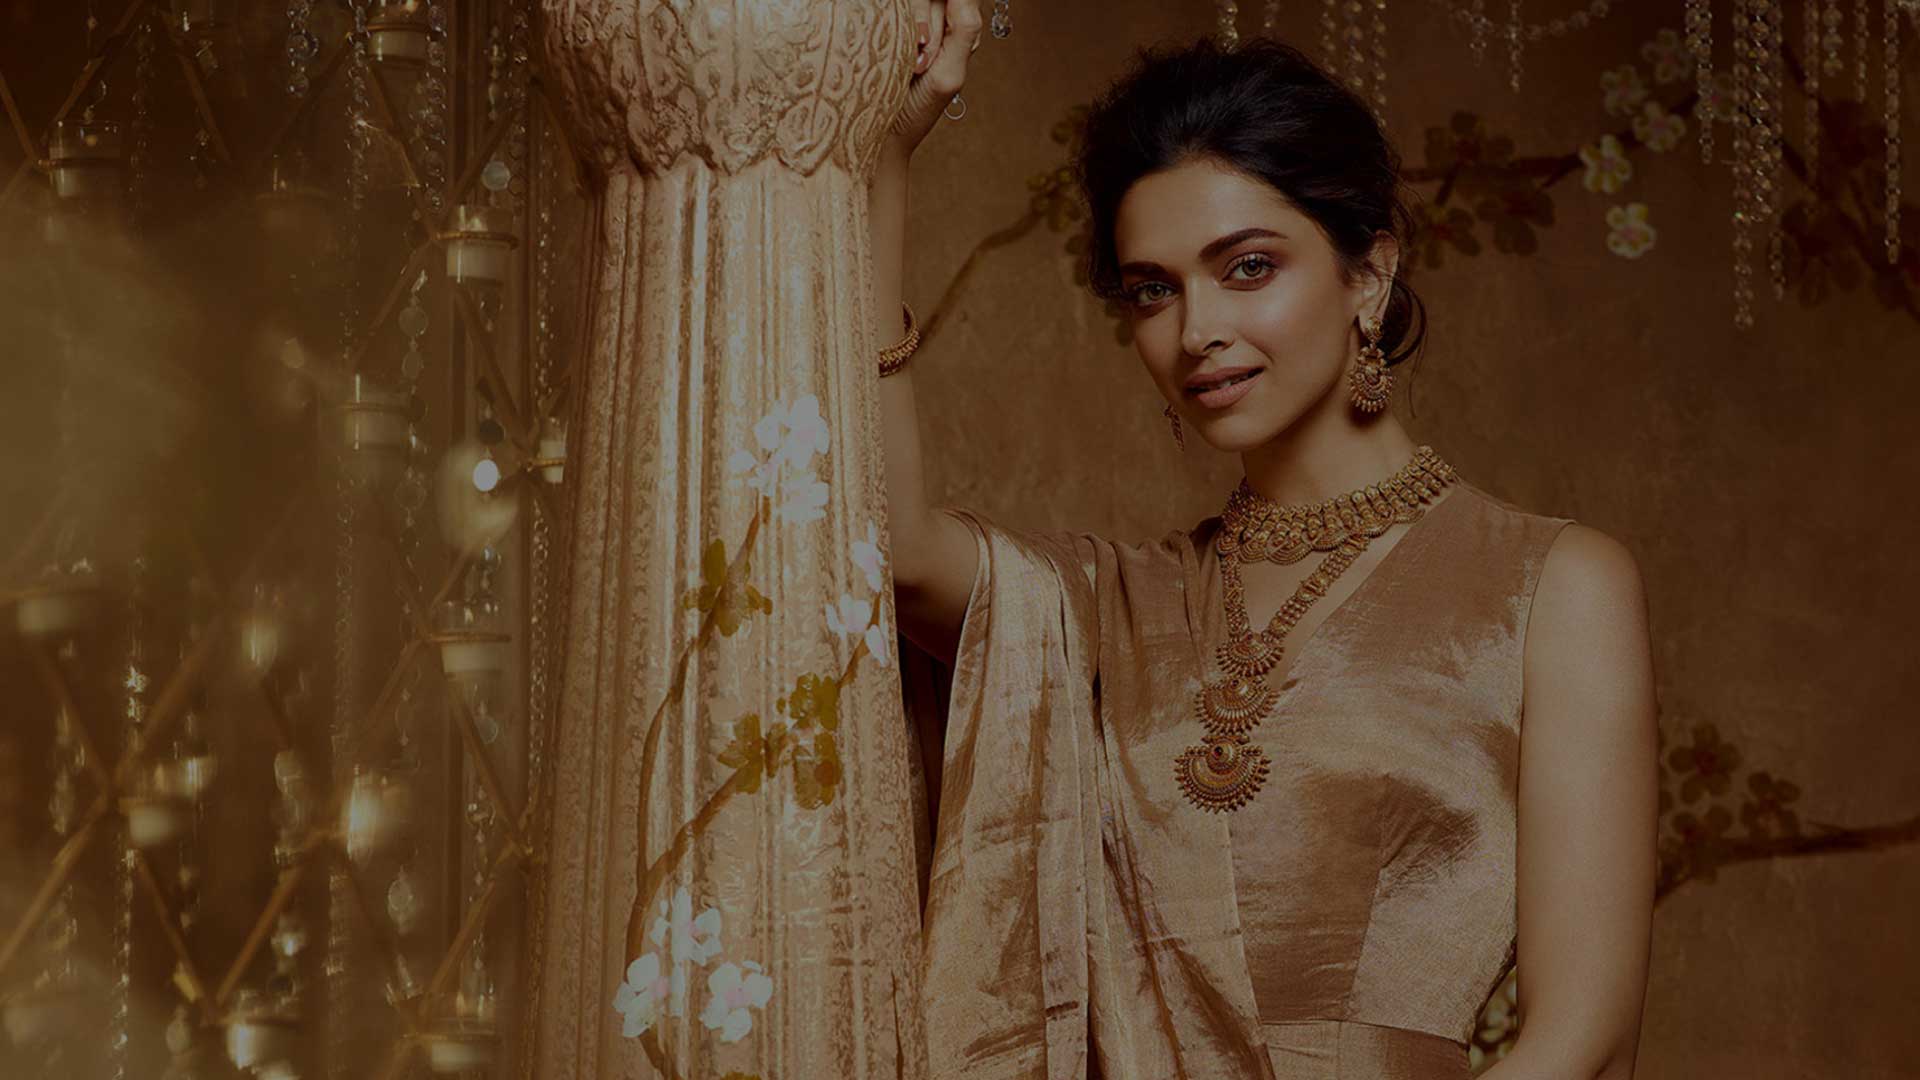 Tanishq is a leading retail jewellery brand today